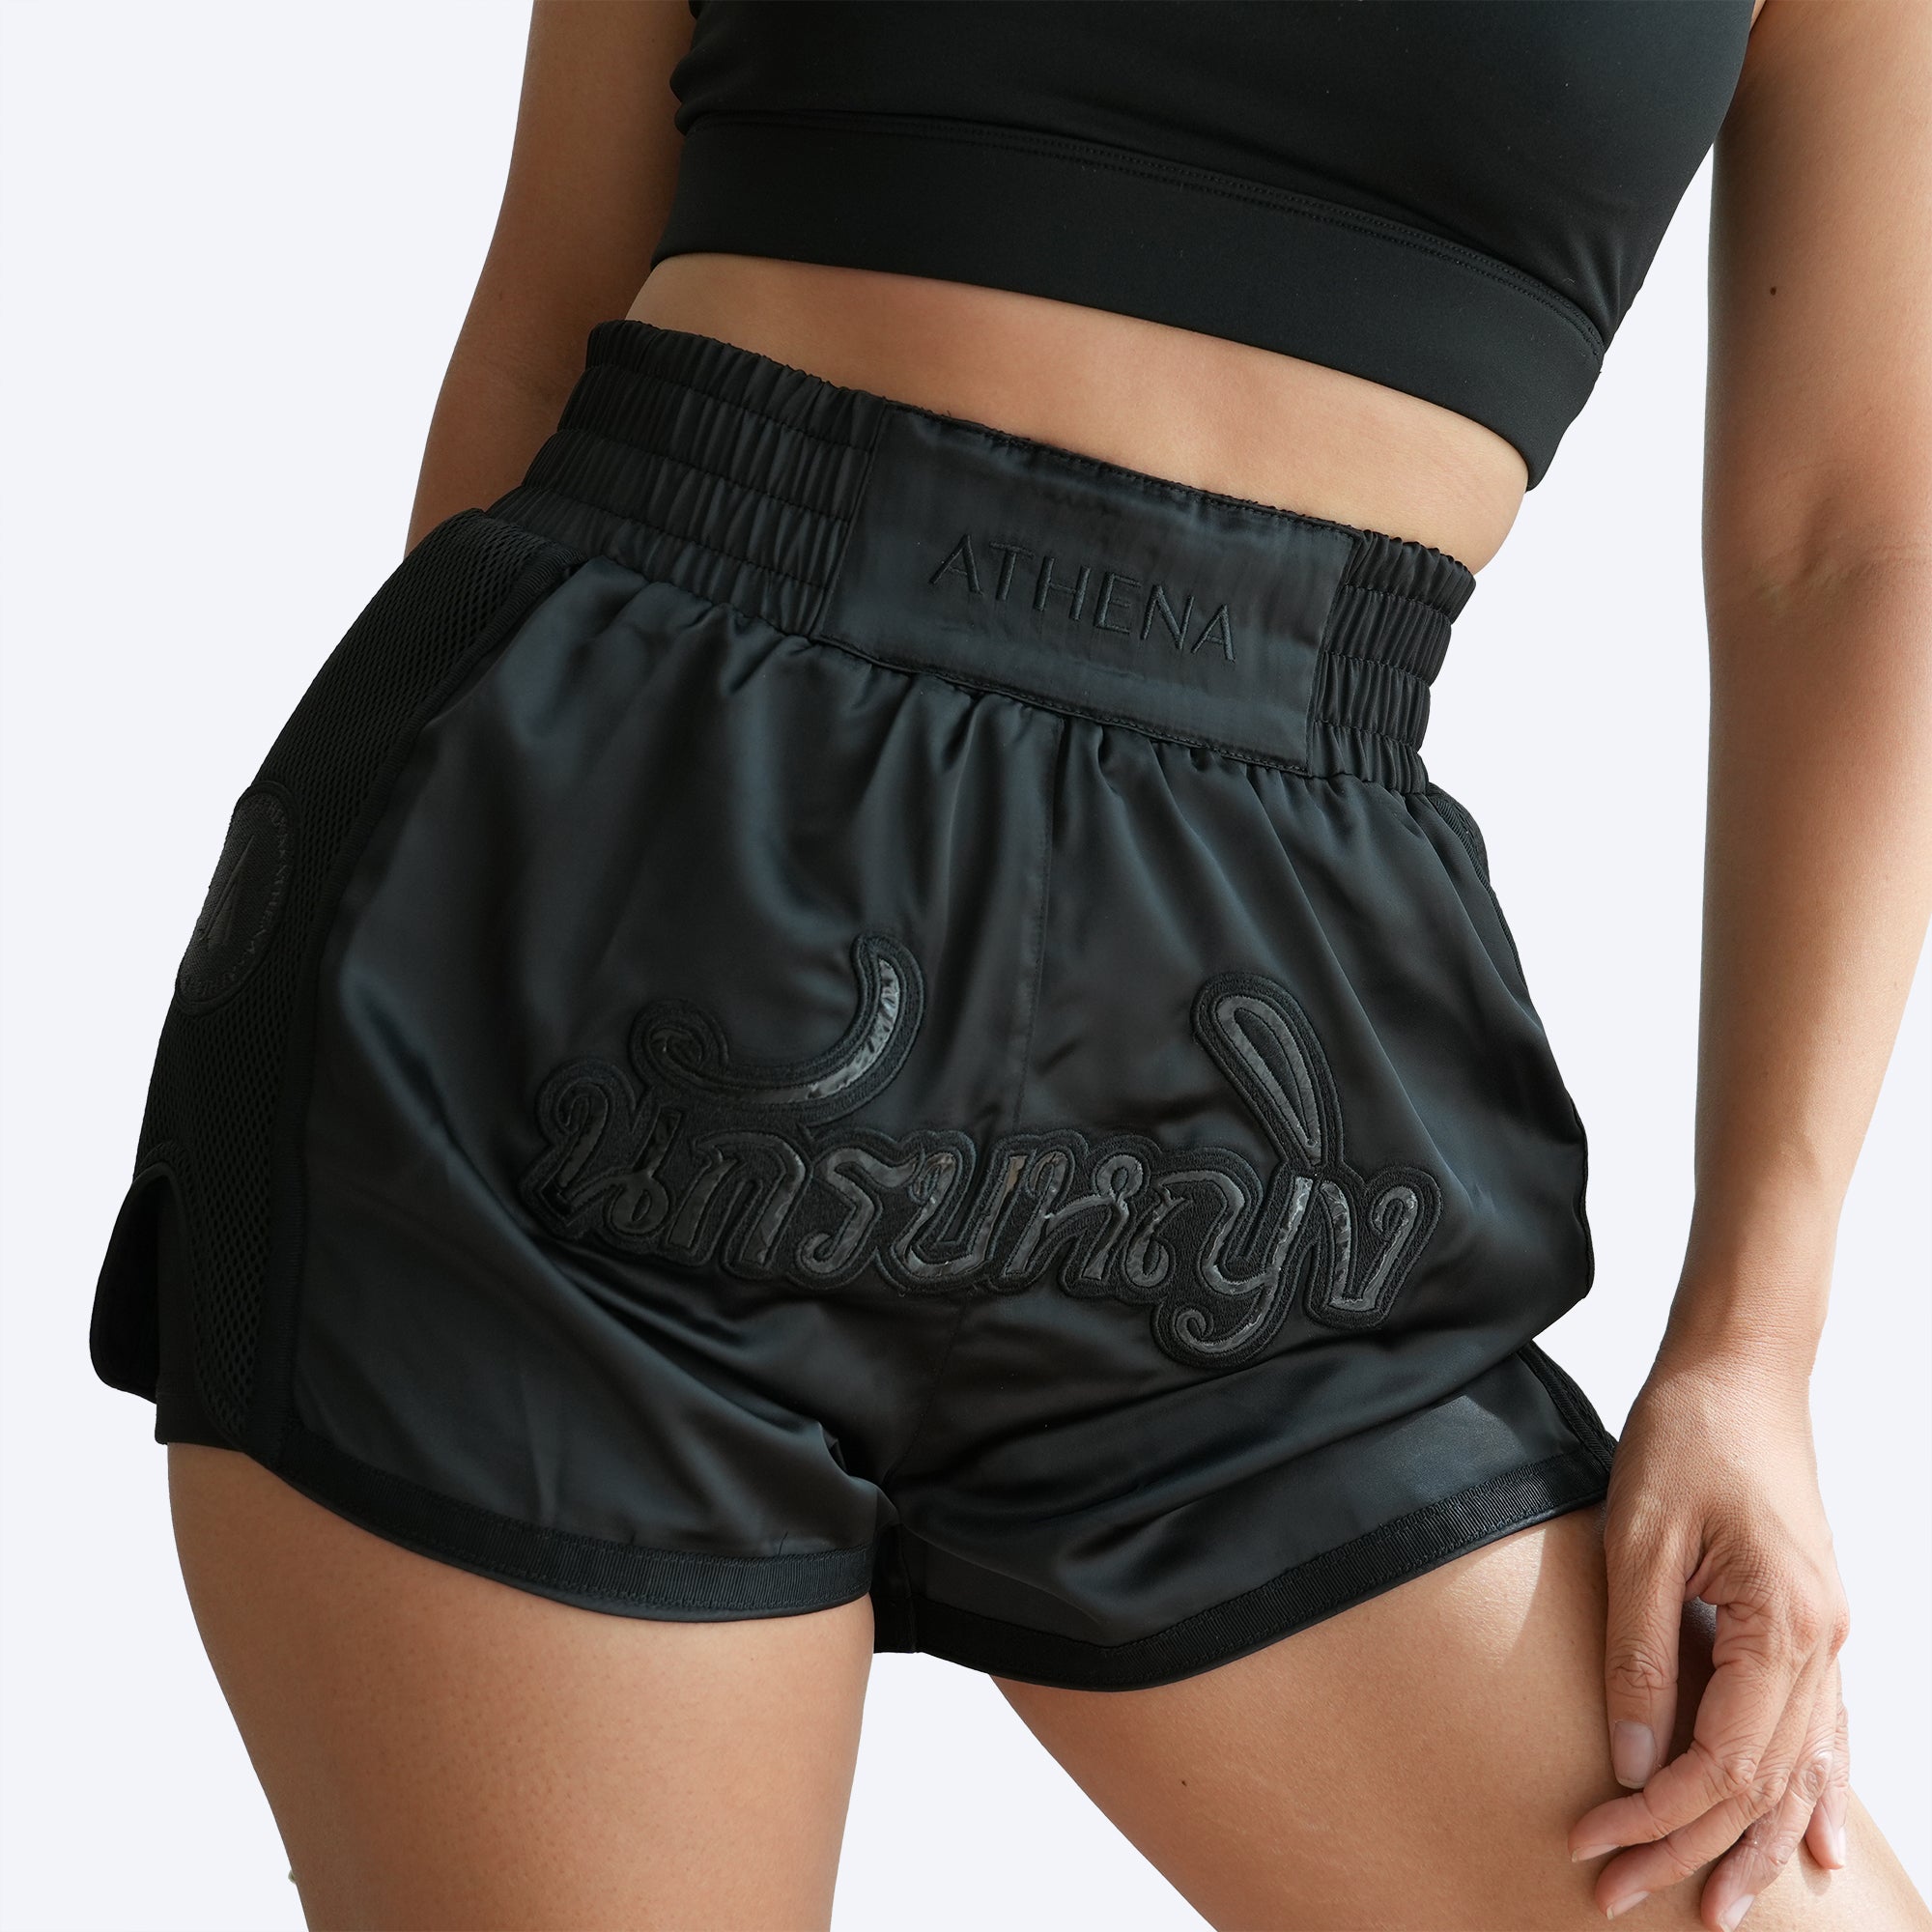 Athena Fightwear women's Artemisia Muay Thai Shorts with wide hips and built in safety shorts with anti camel toe anti ride up and pockets